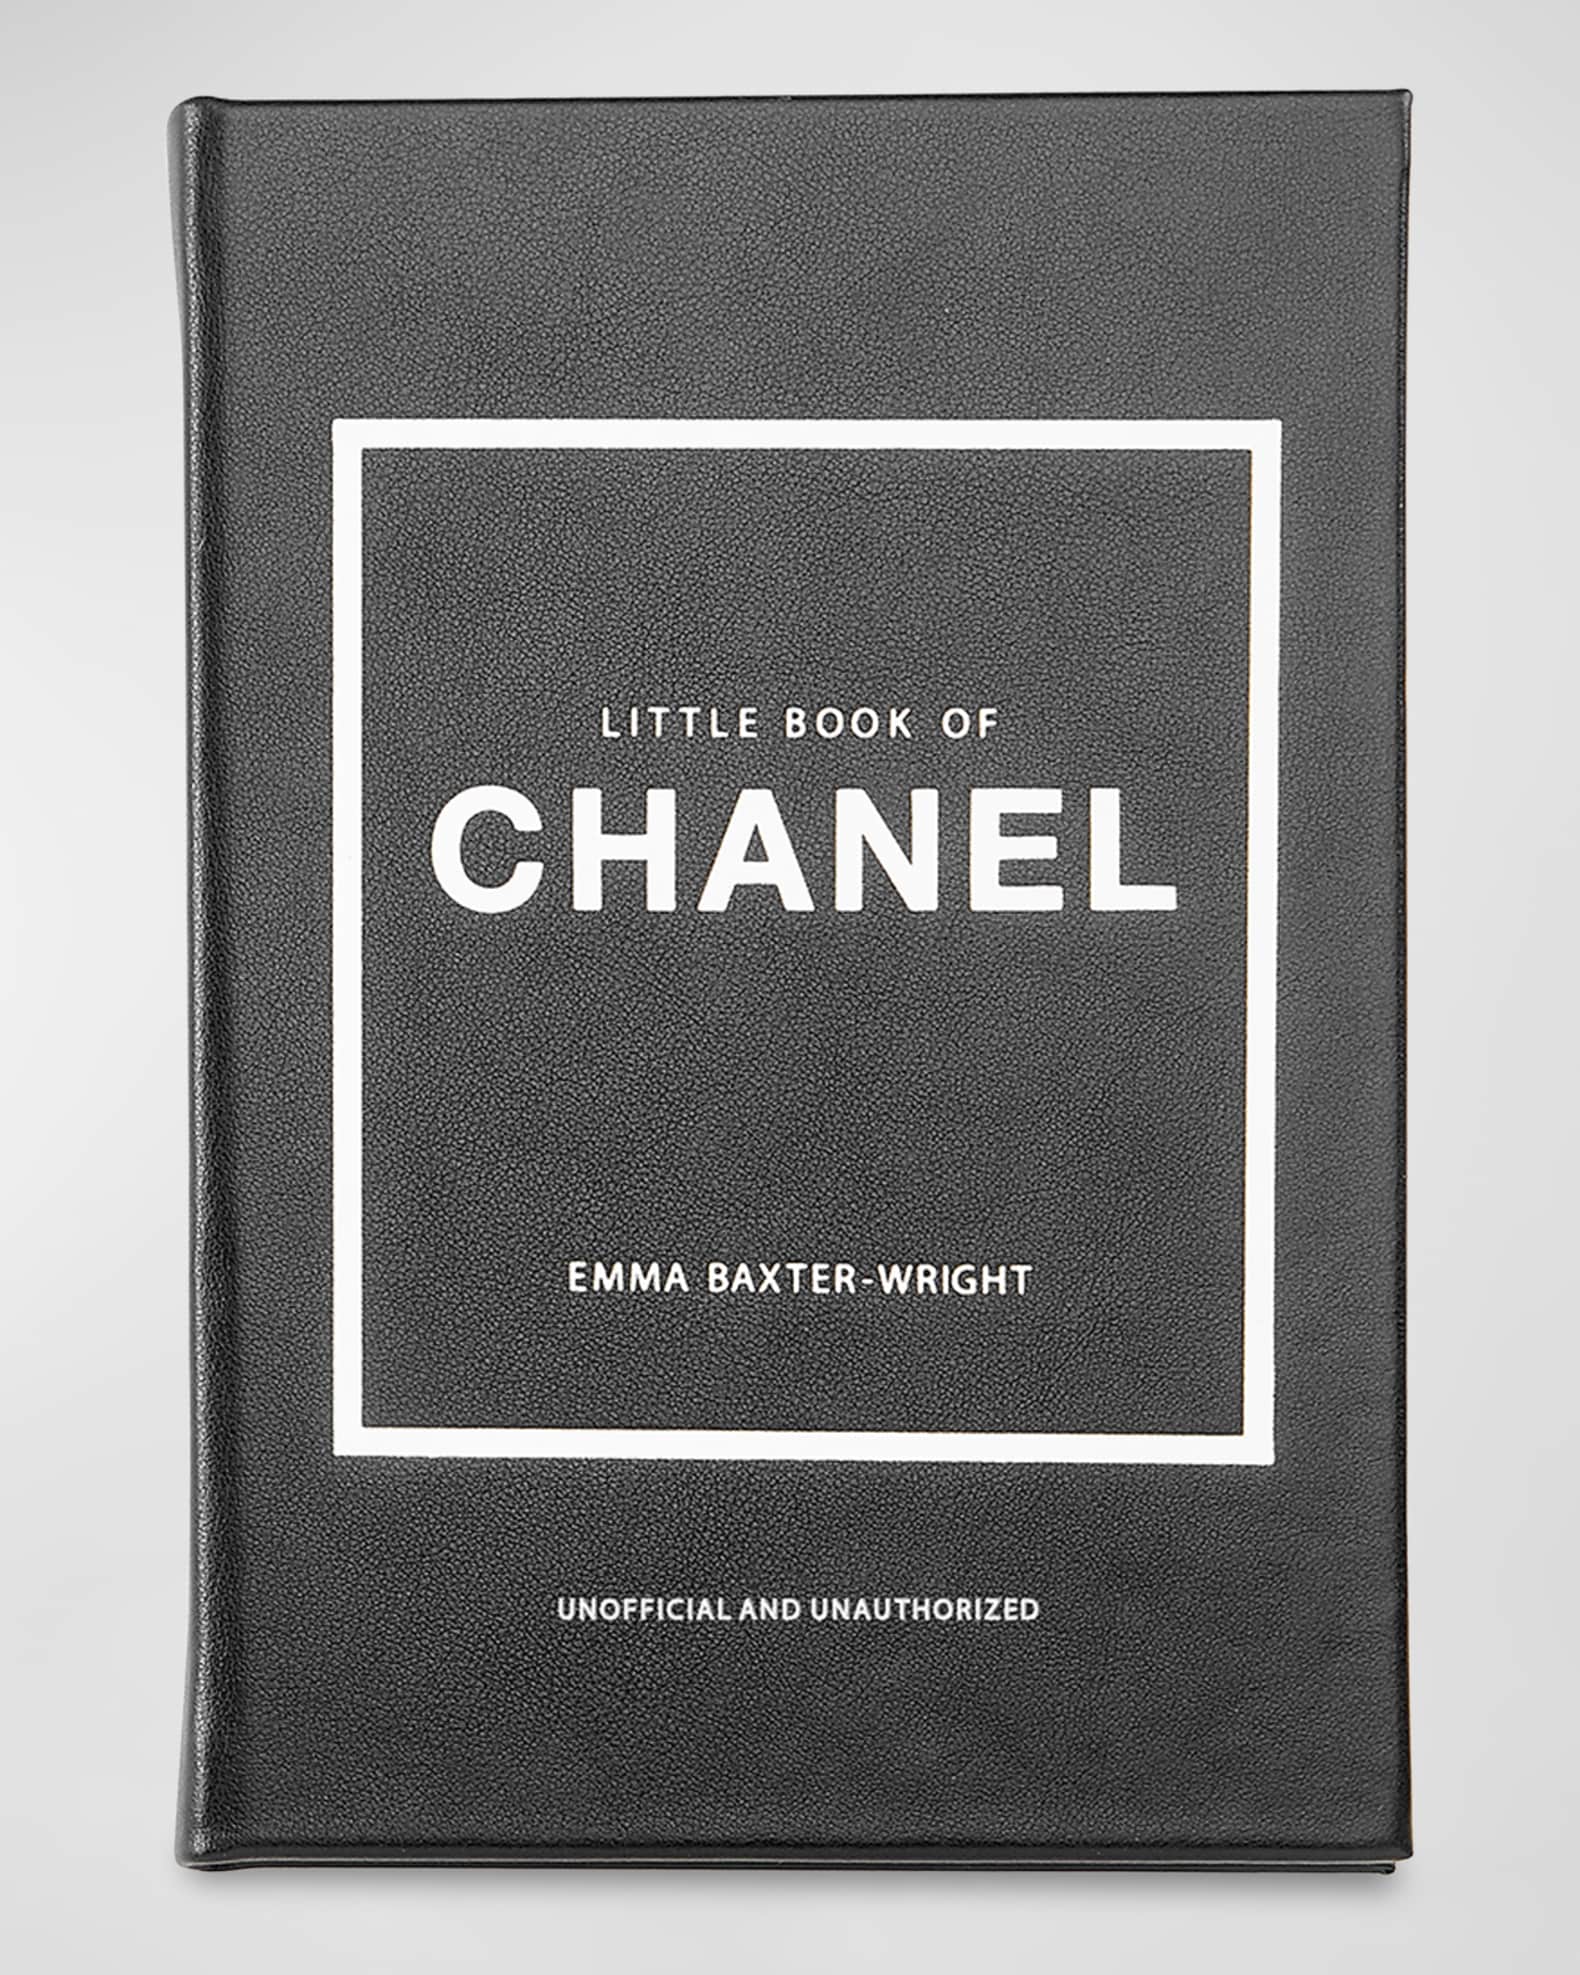 Graphic Image Little Book of Chanel Book